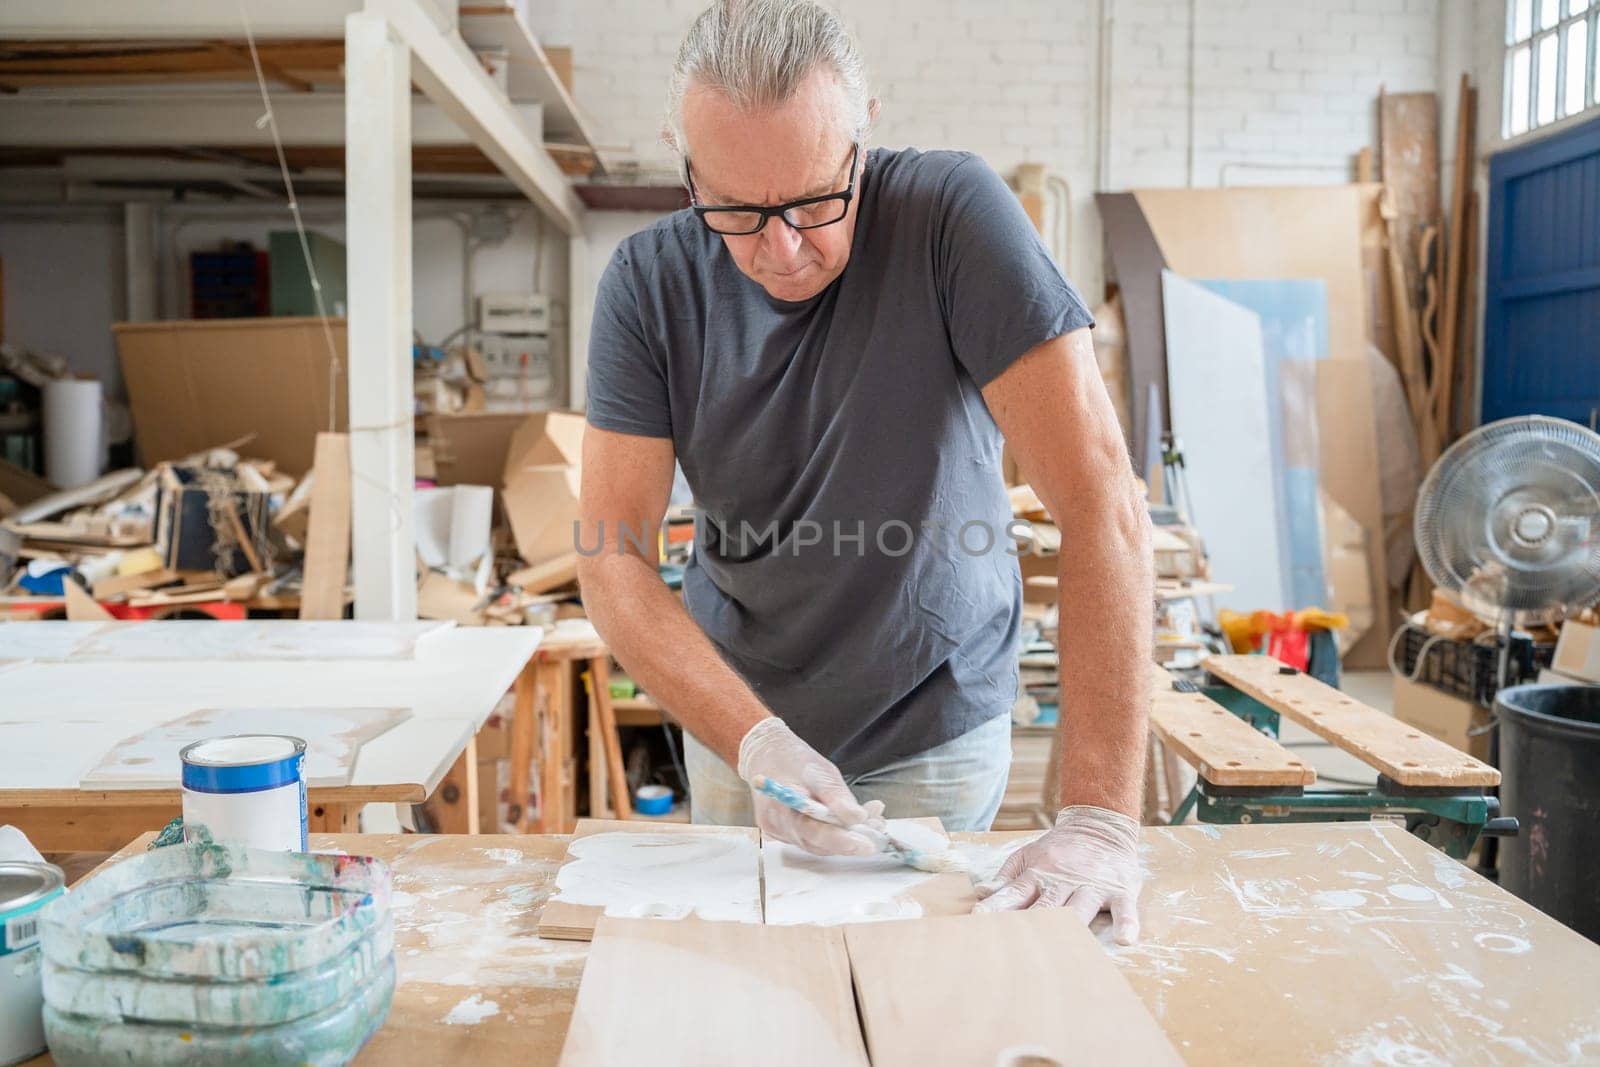 Senior artist working on wood craft at workshop painting wooden furniture. by PaulCarr